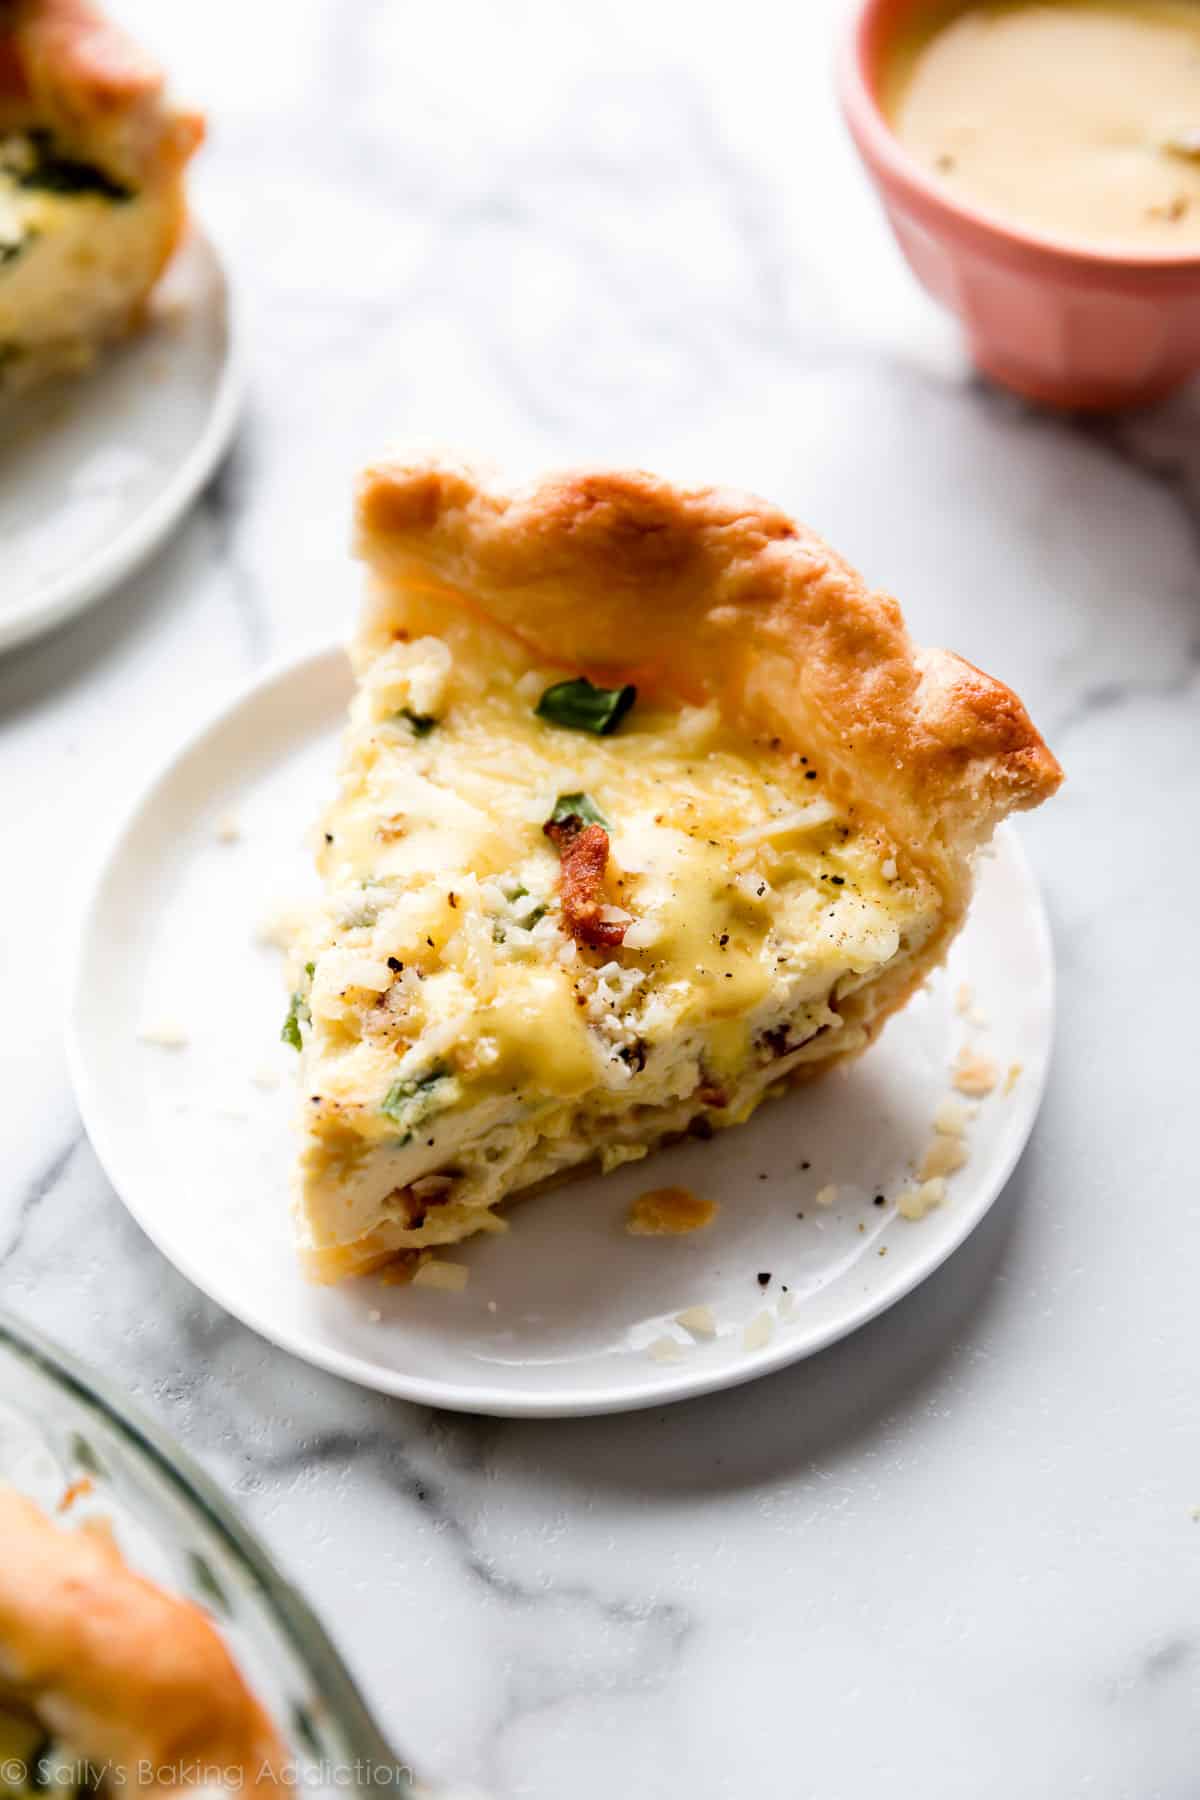 Slice of quiche on a white plate